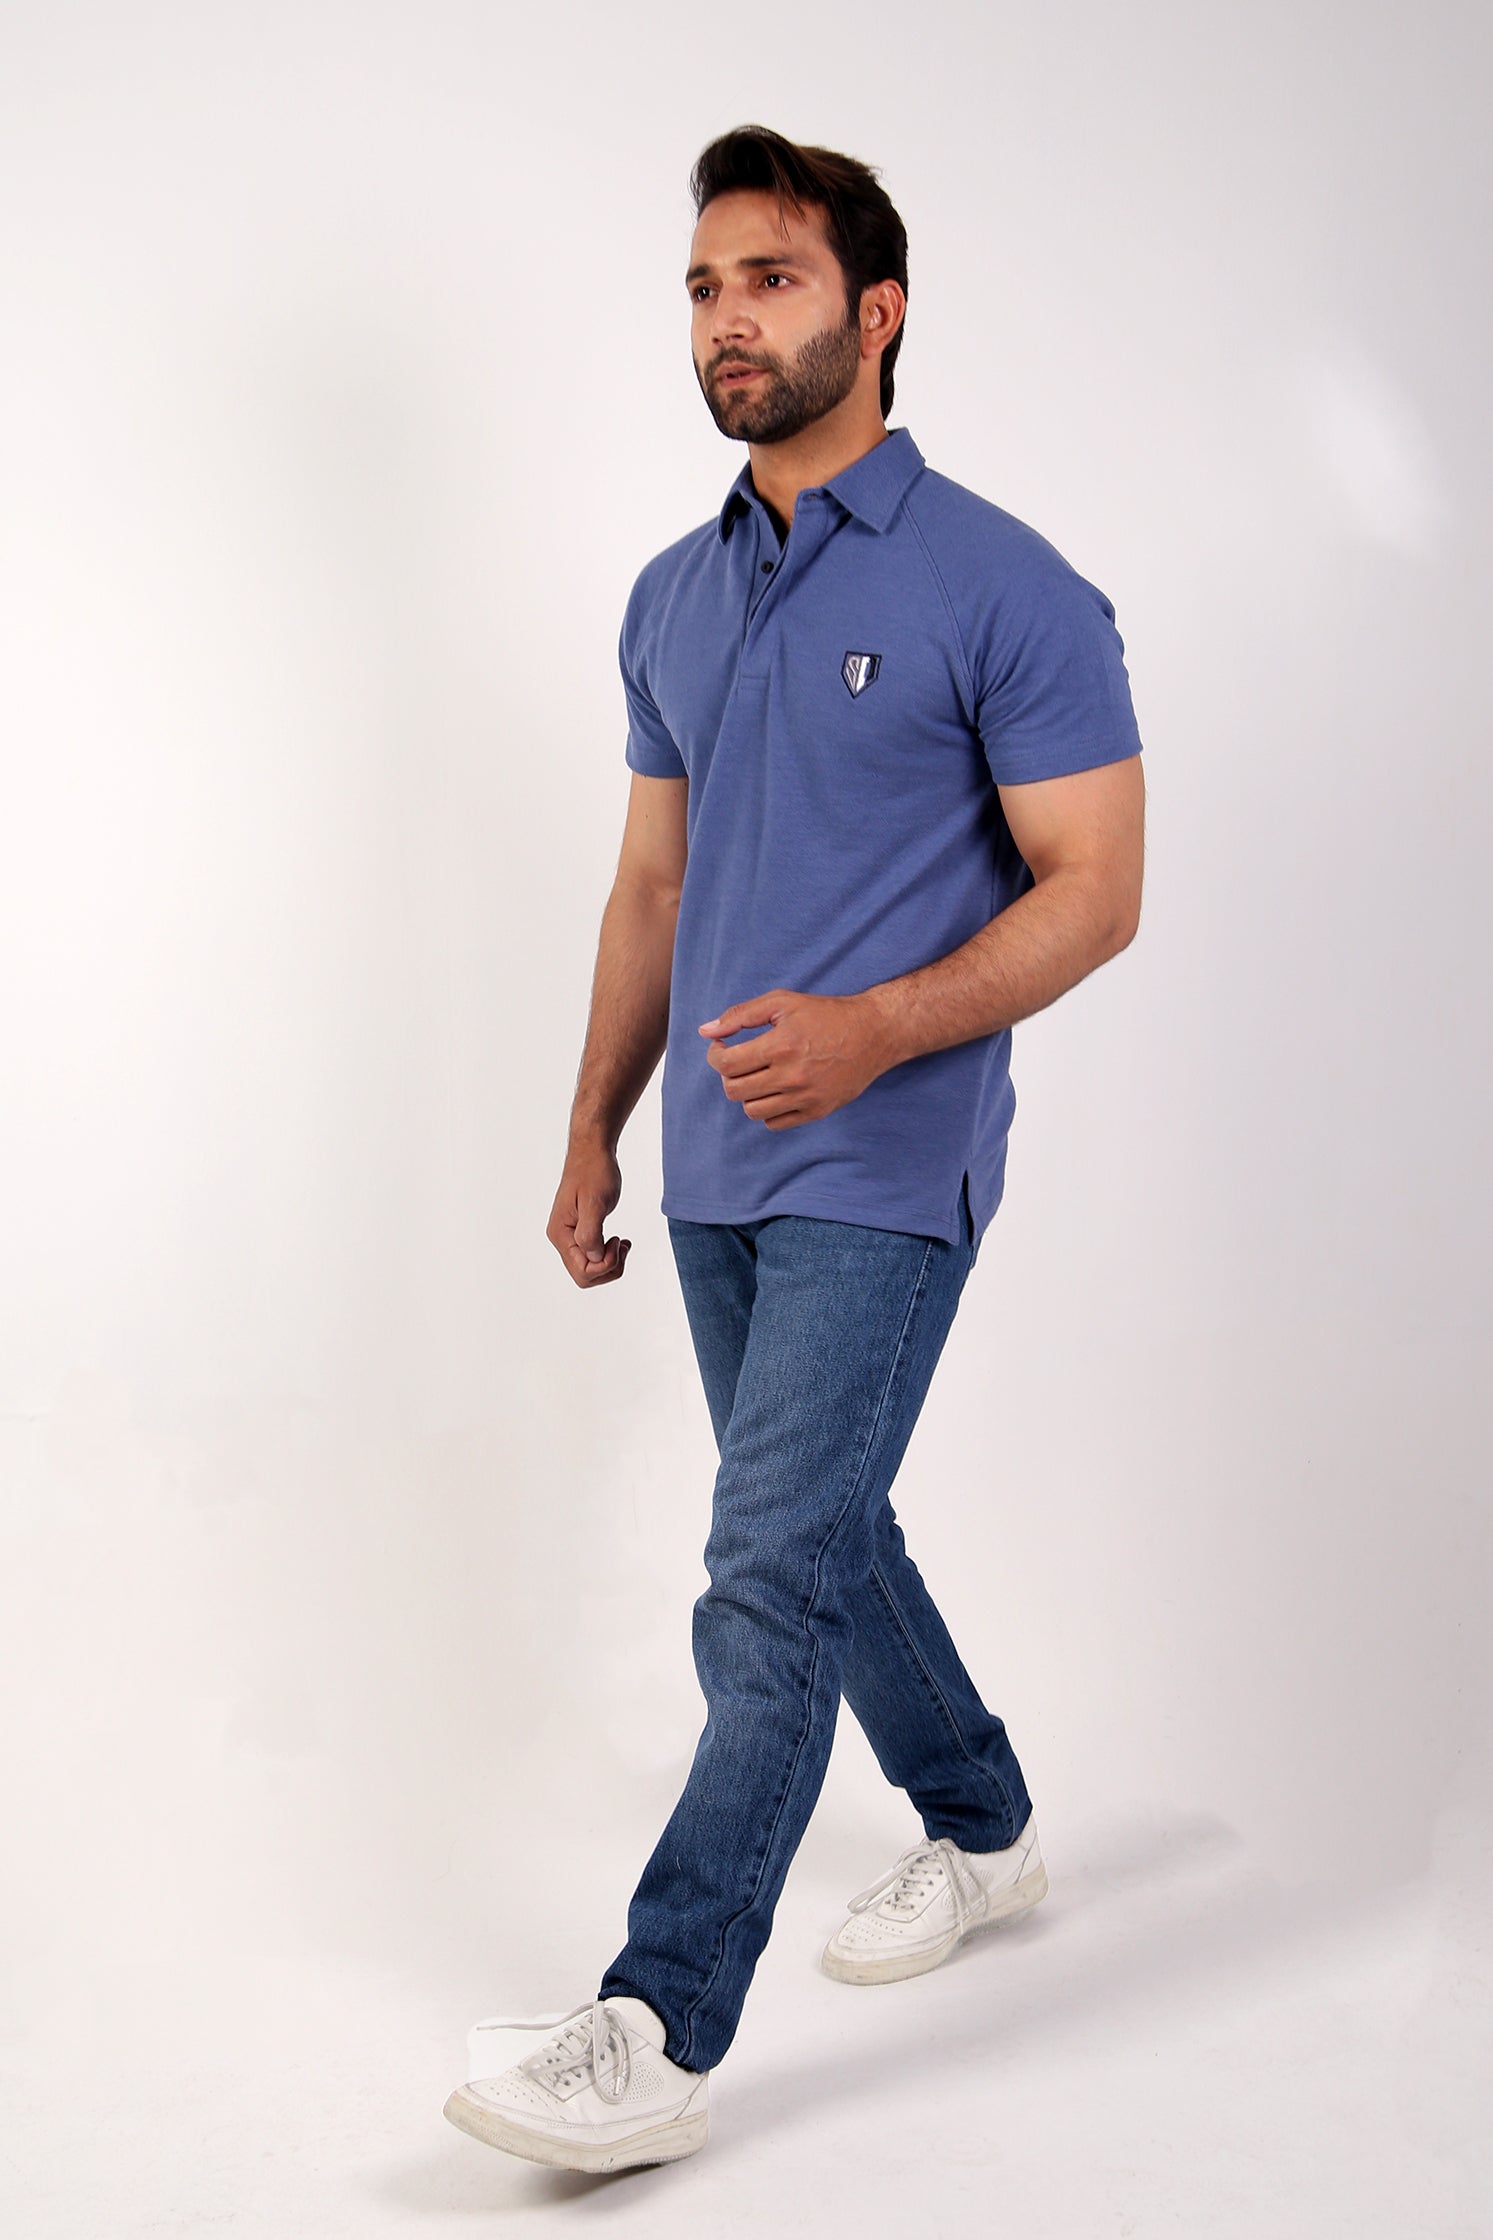 MENS POLO TEAL BLUE FRONT EMB